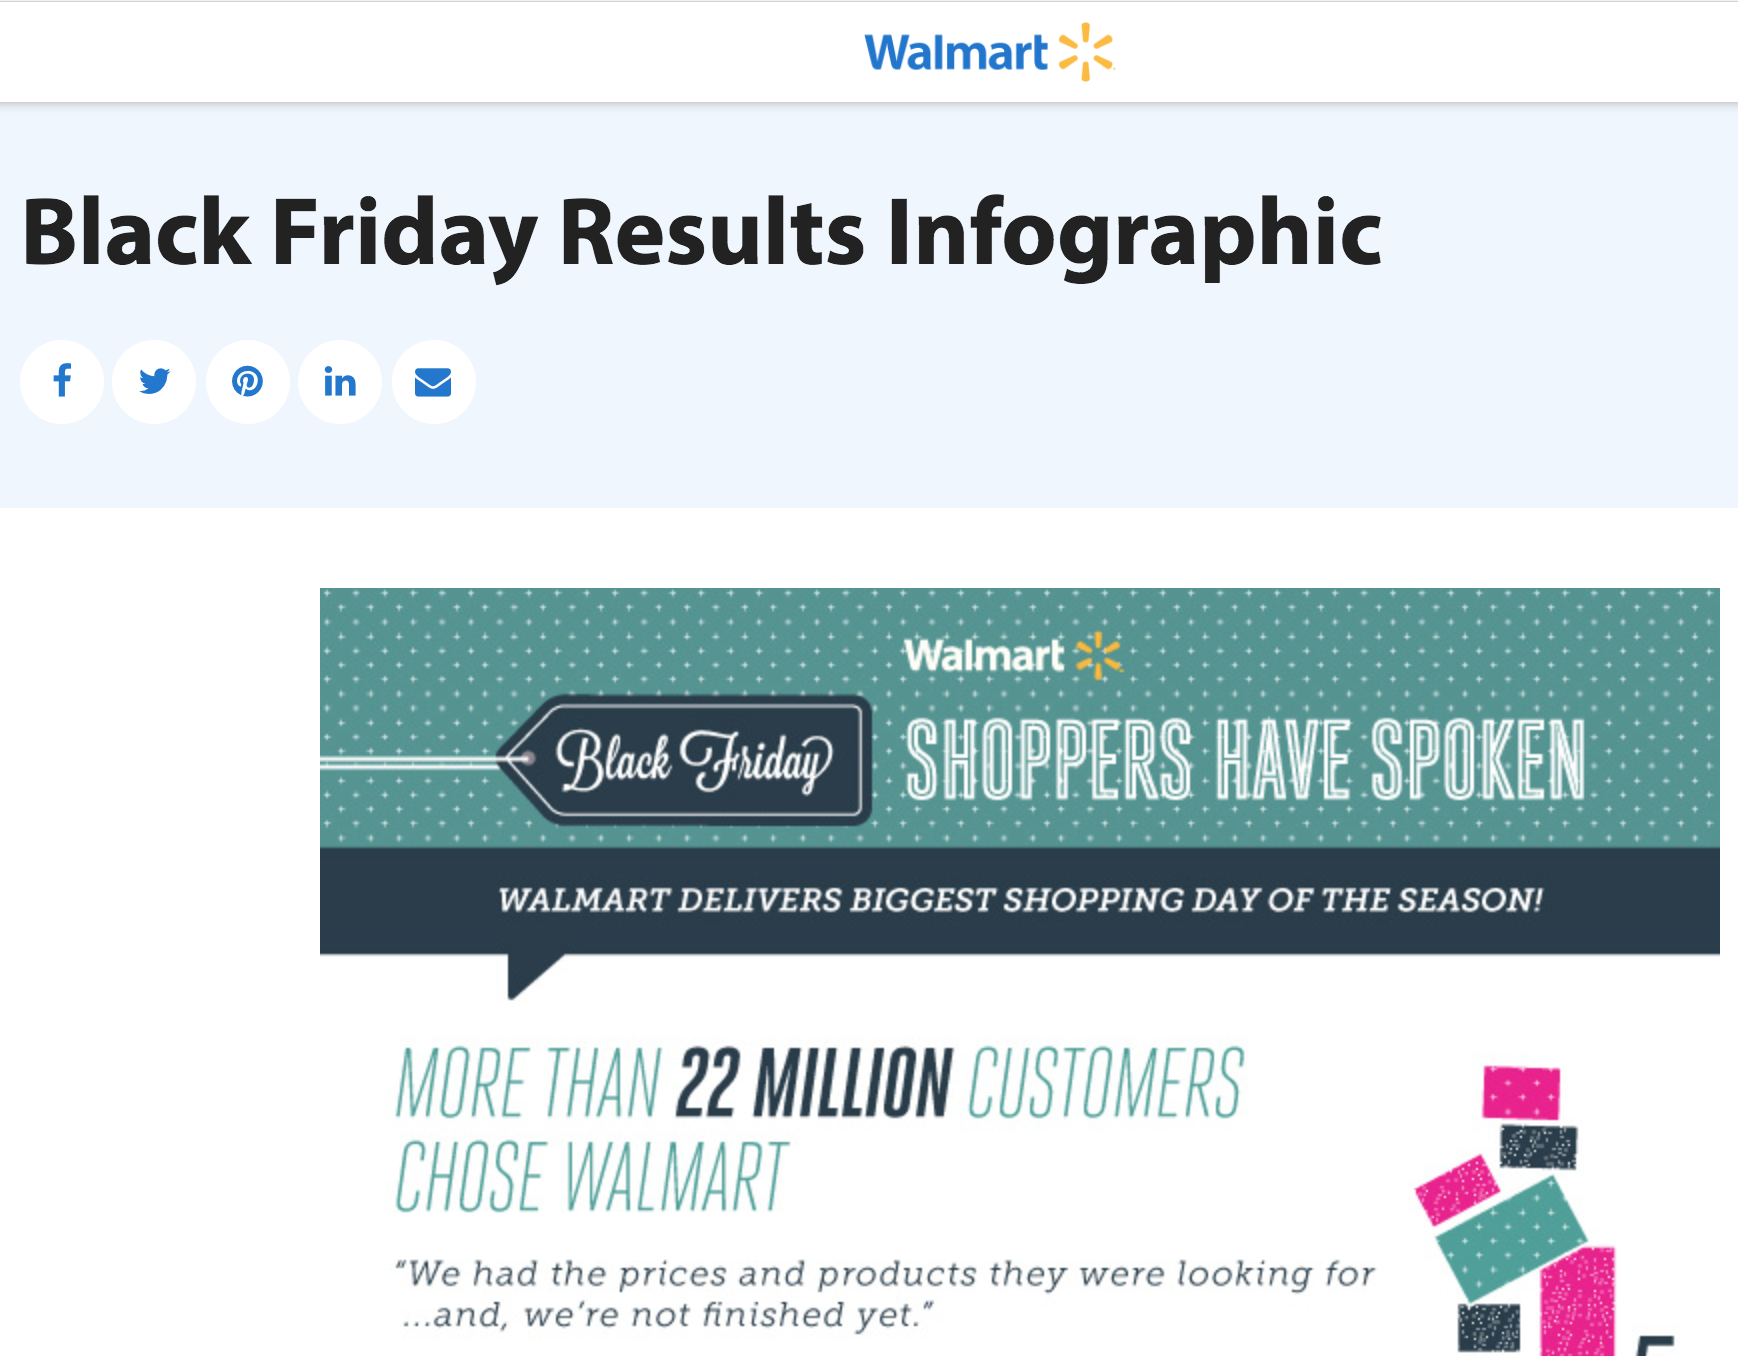 Screenshot showing infographic about black friday sales